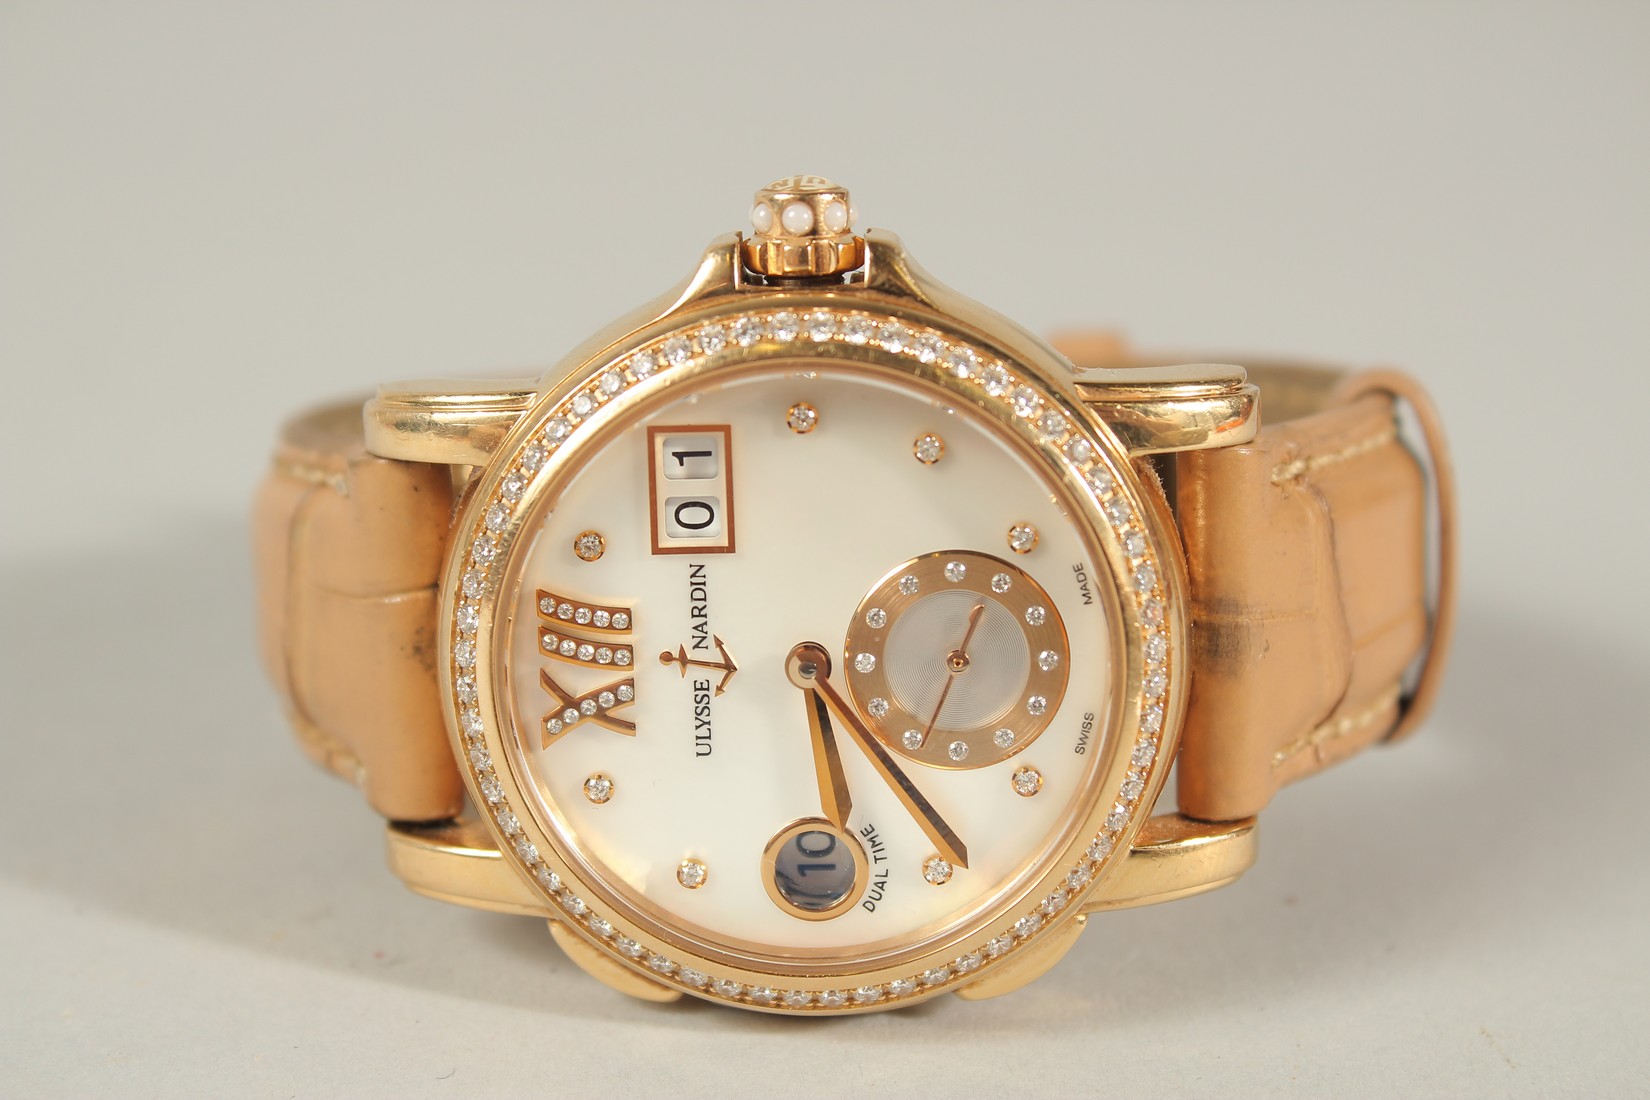 A SUPERB ULYSSE NARDIN 18CT ROSE GOLD WRISTWATCH with mother-of-pearl face, diamond surround, date